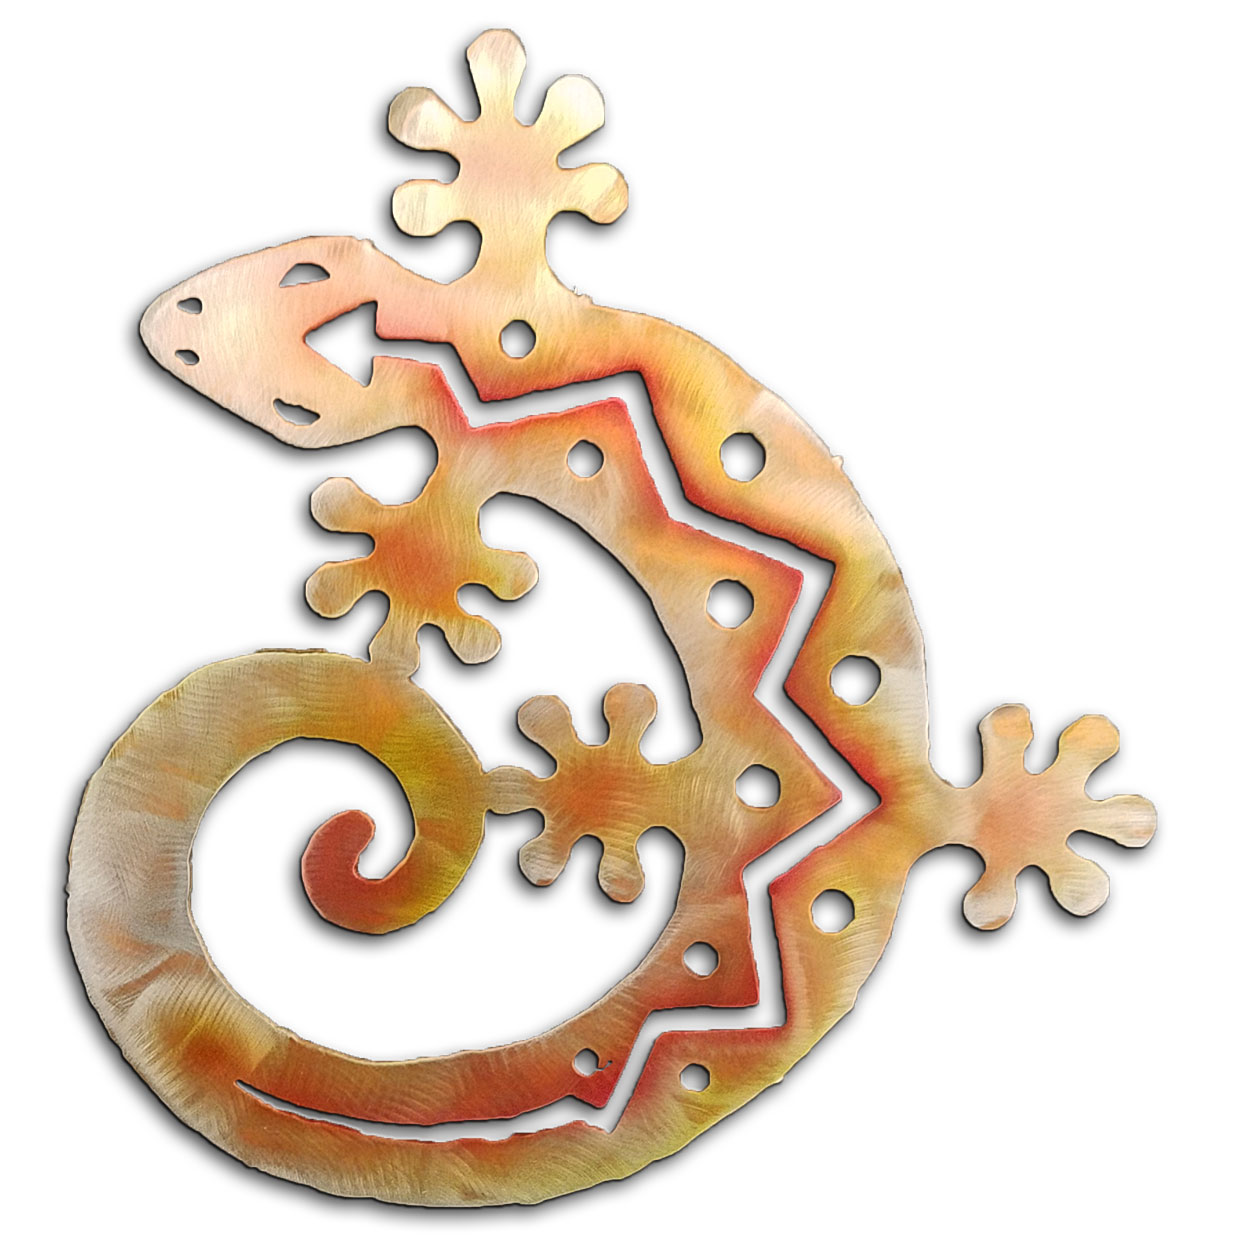 165021 - 12-inch small C-Shaped Gecko 3D Metal Wall Art in a vibrant sunset swirl finish